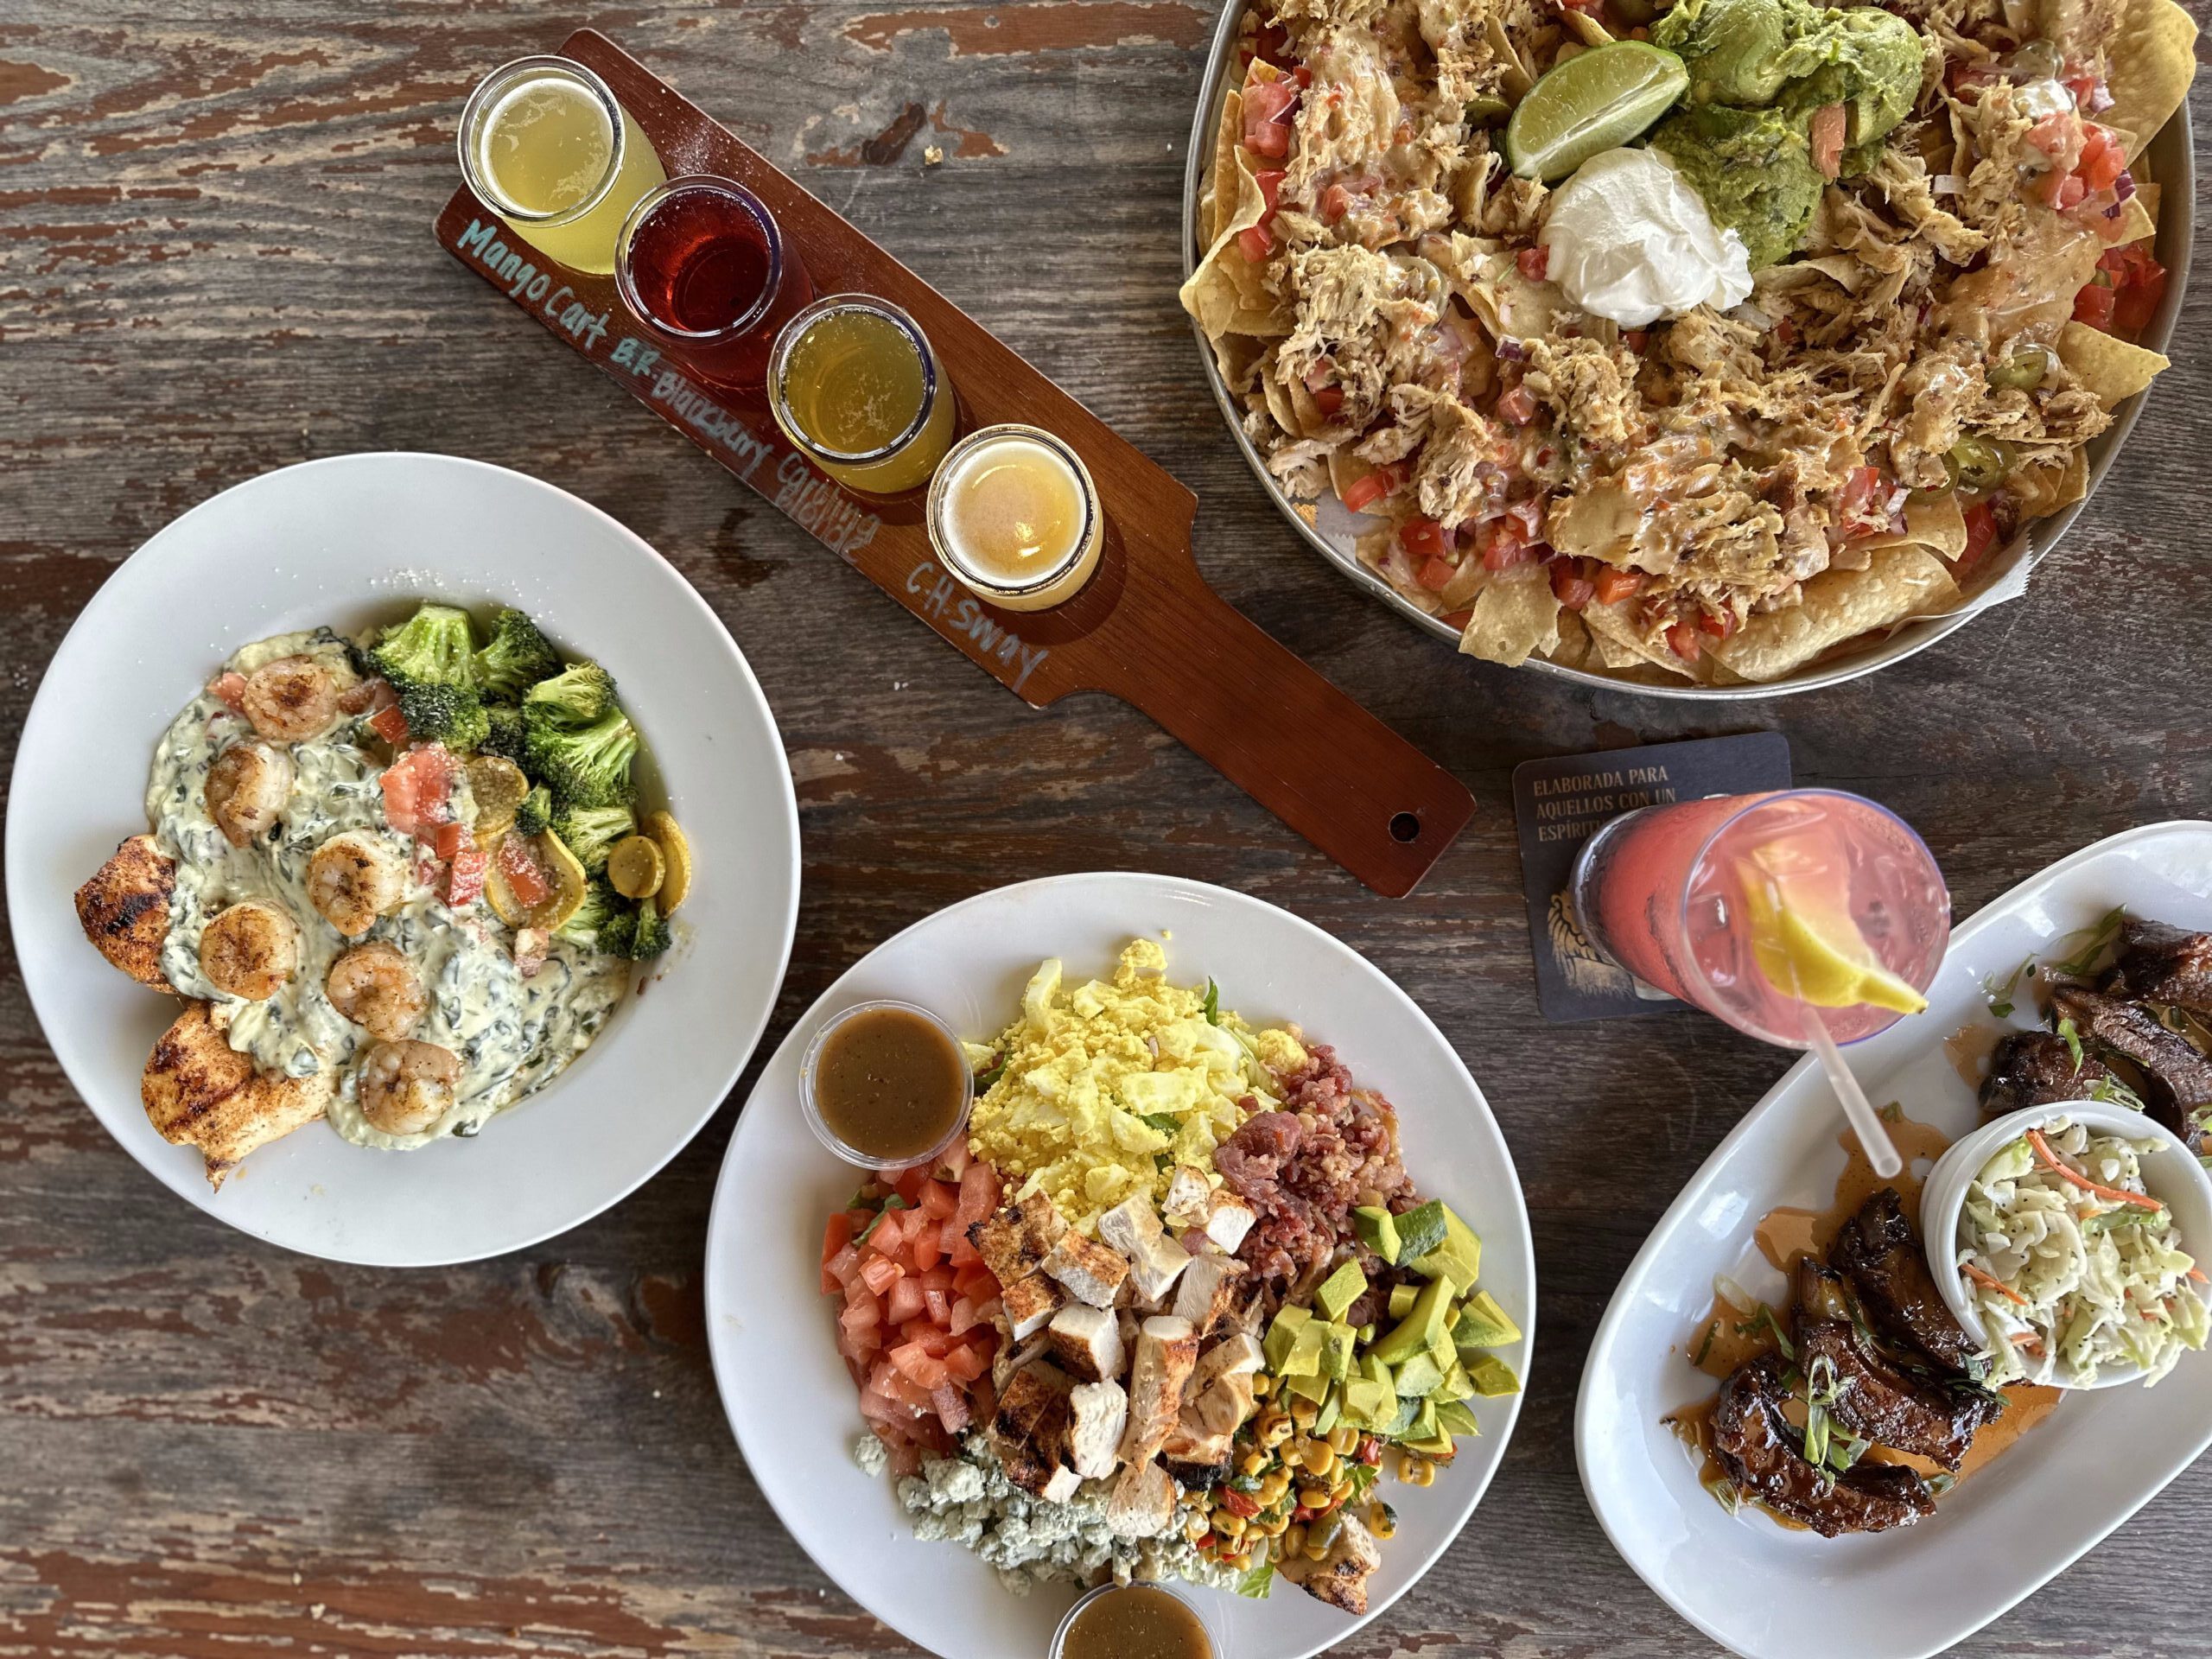 Aerial shot of a table displaying diverse meals. Left: grilled shrimp, broccoli, and creamy spinach sauce. Center: a chopped salad featuring scrambled eggs, avocado, diced tomatoes, and grilled chicken. Right: nachos topped with shredded chicken, sour cream, and salsa. Drinks include three craft beers and a pink cocktail with a lemon slice.